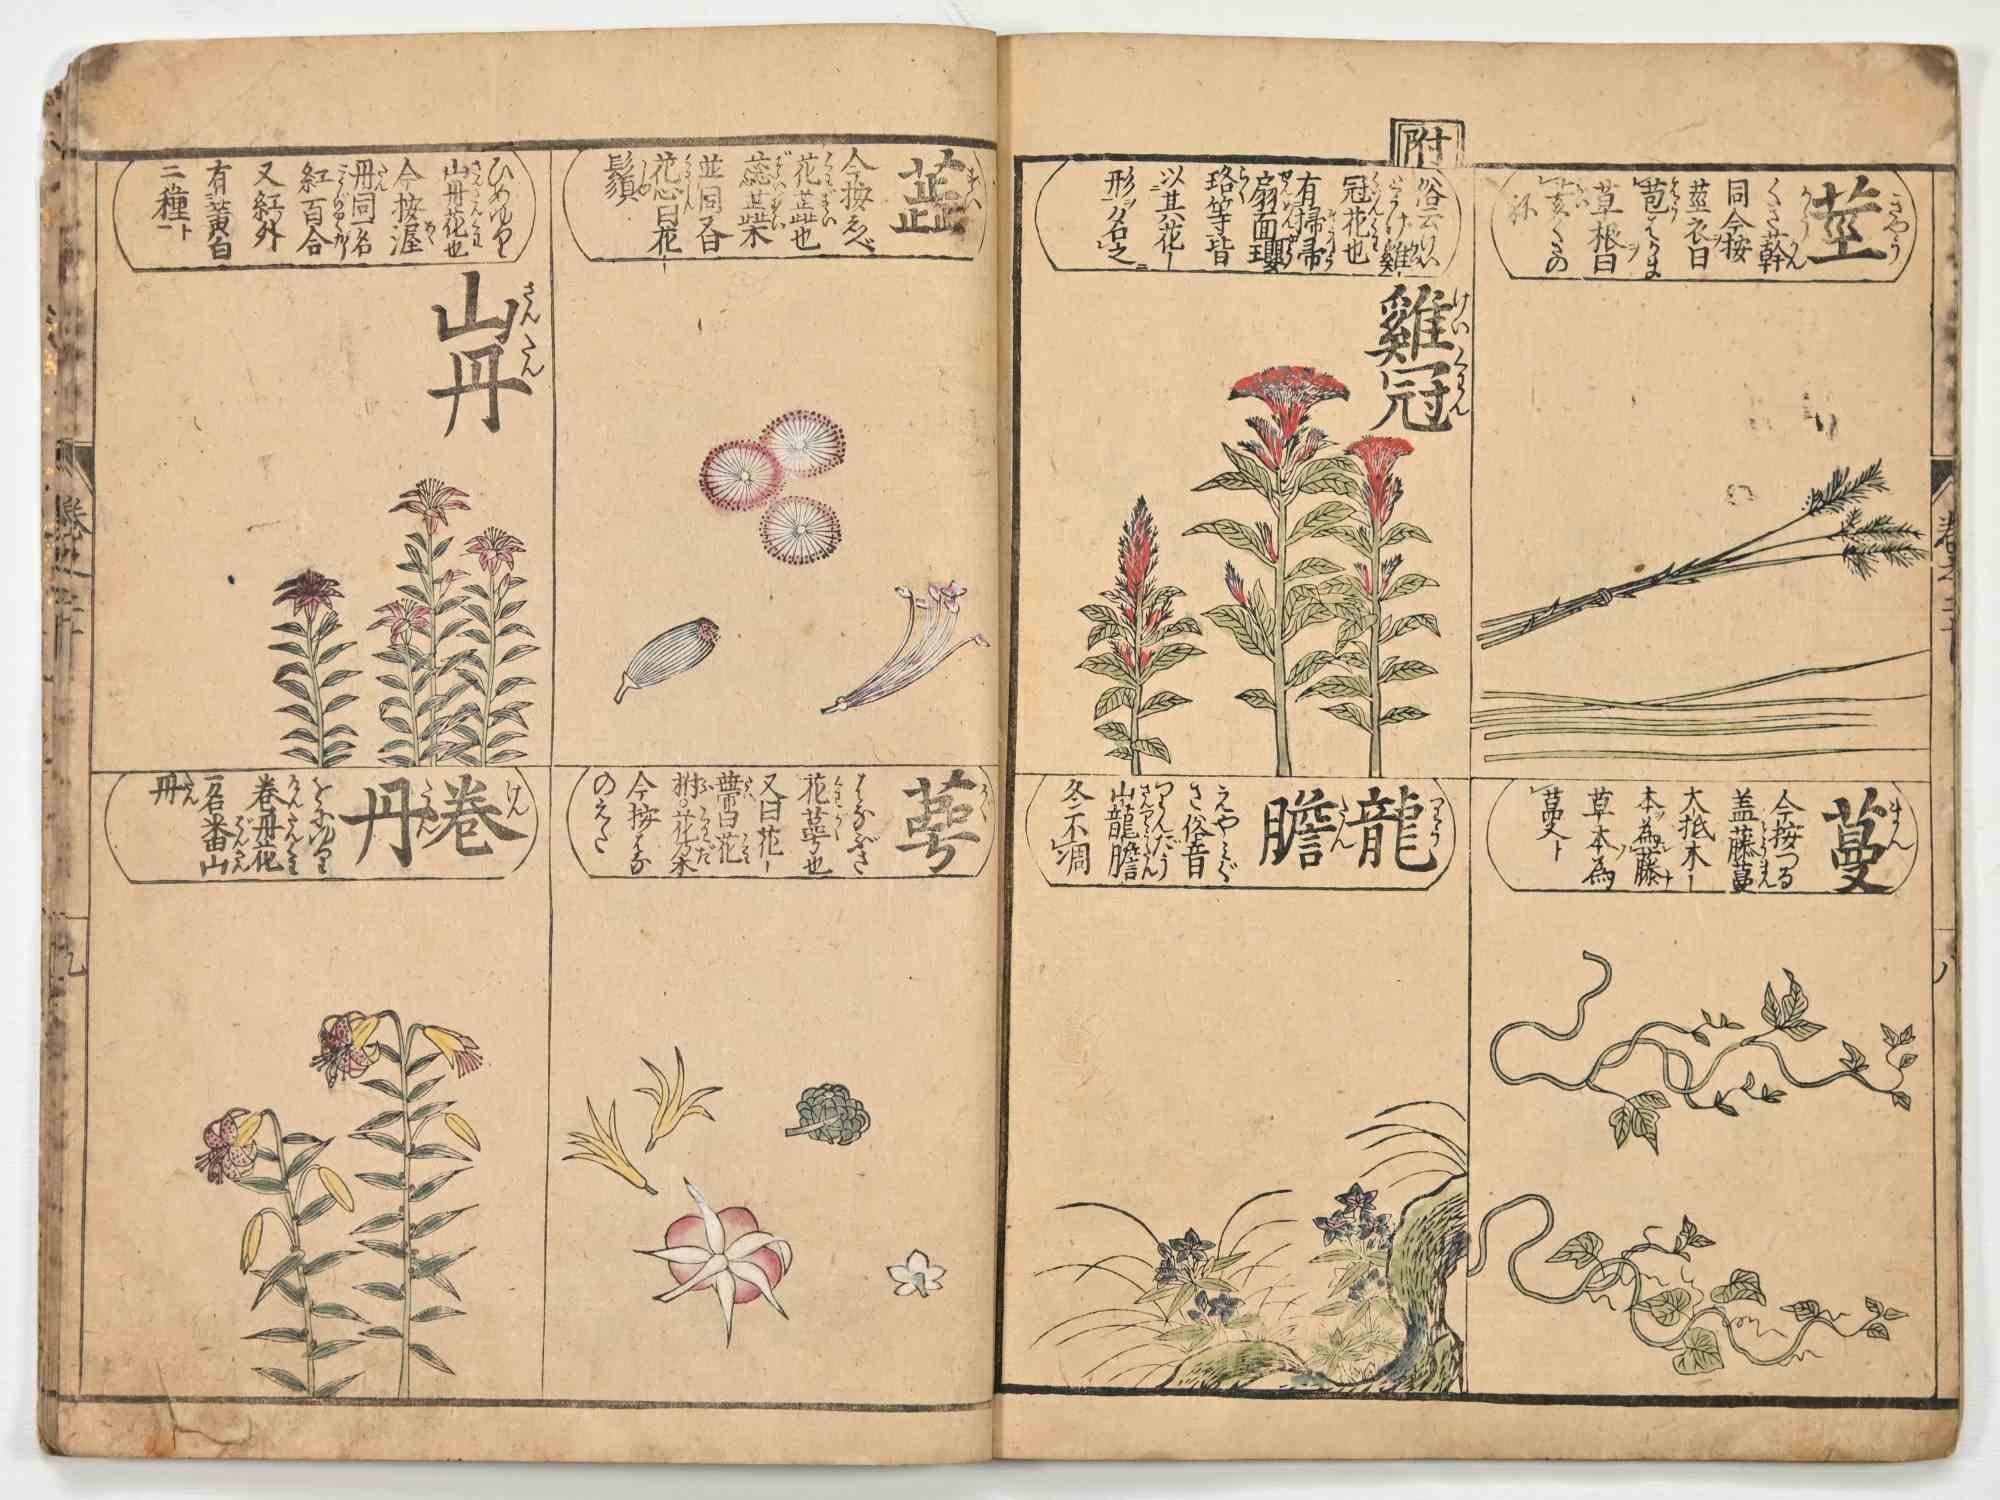 Chinese Herbal Book - Rare Illustrated Book - 19th century - Print by Unknown